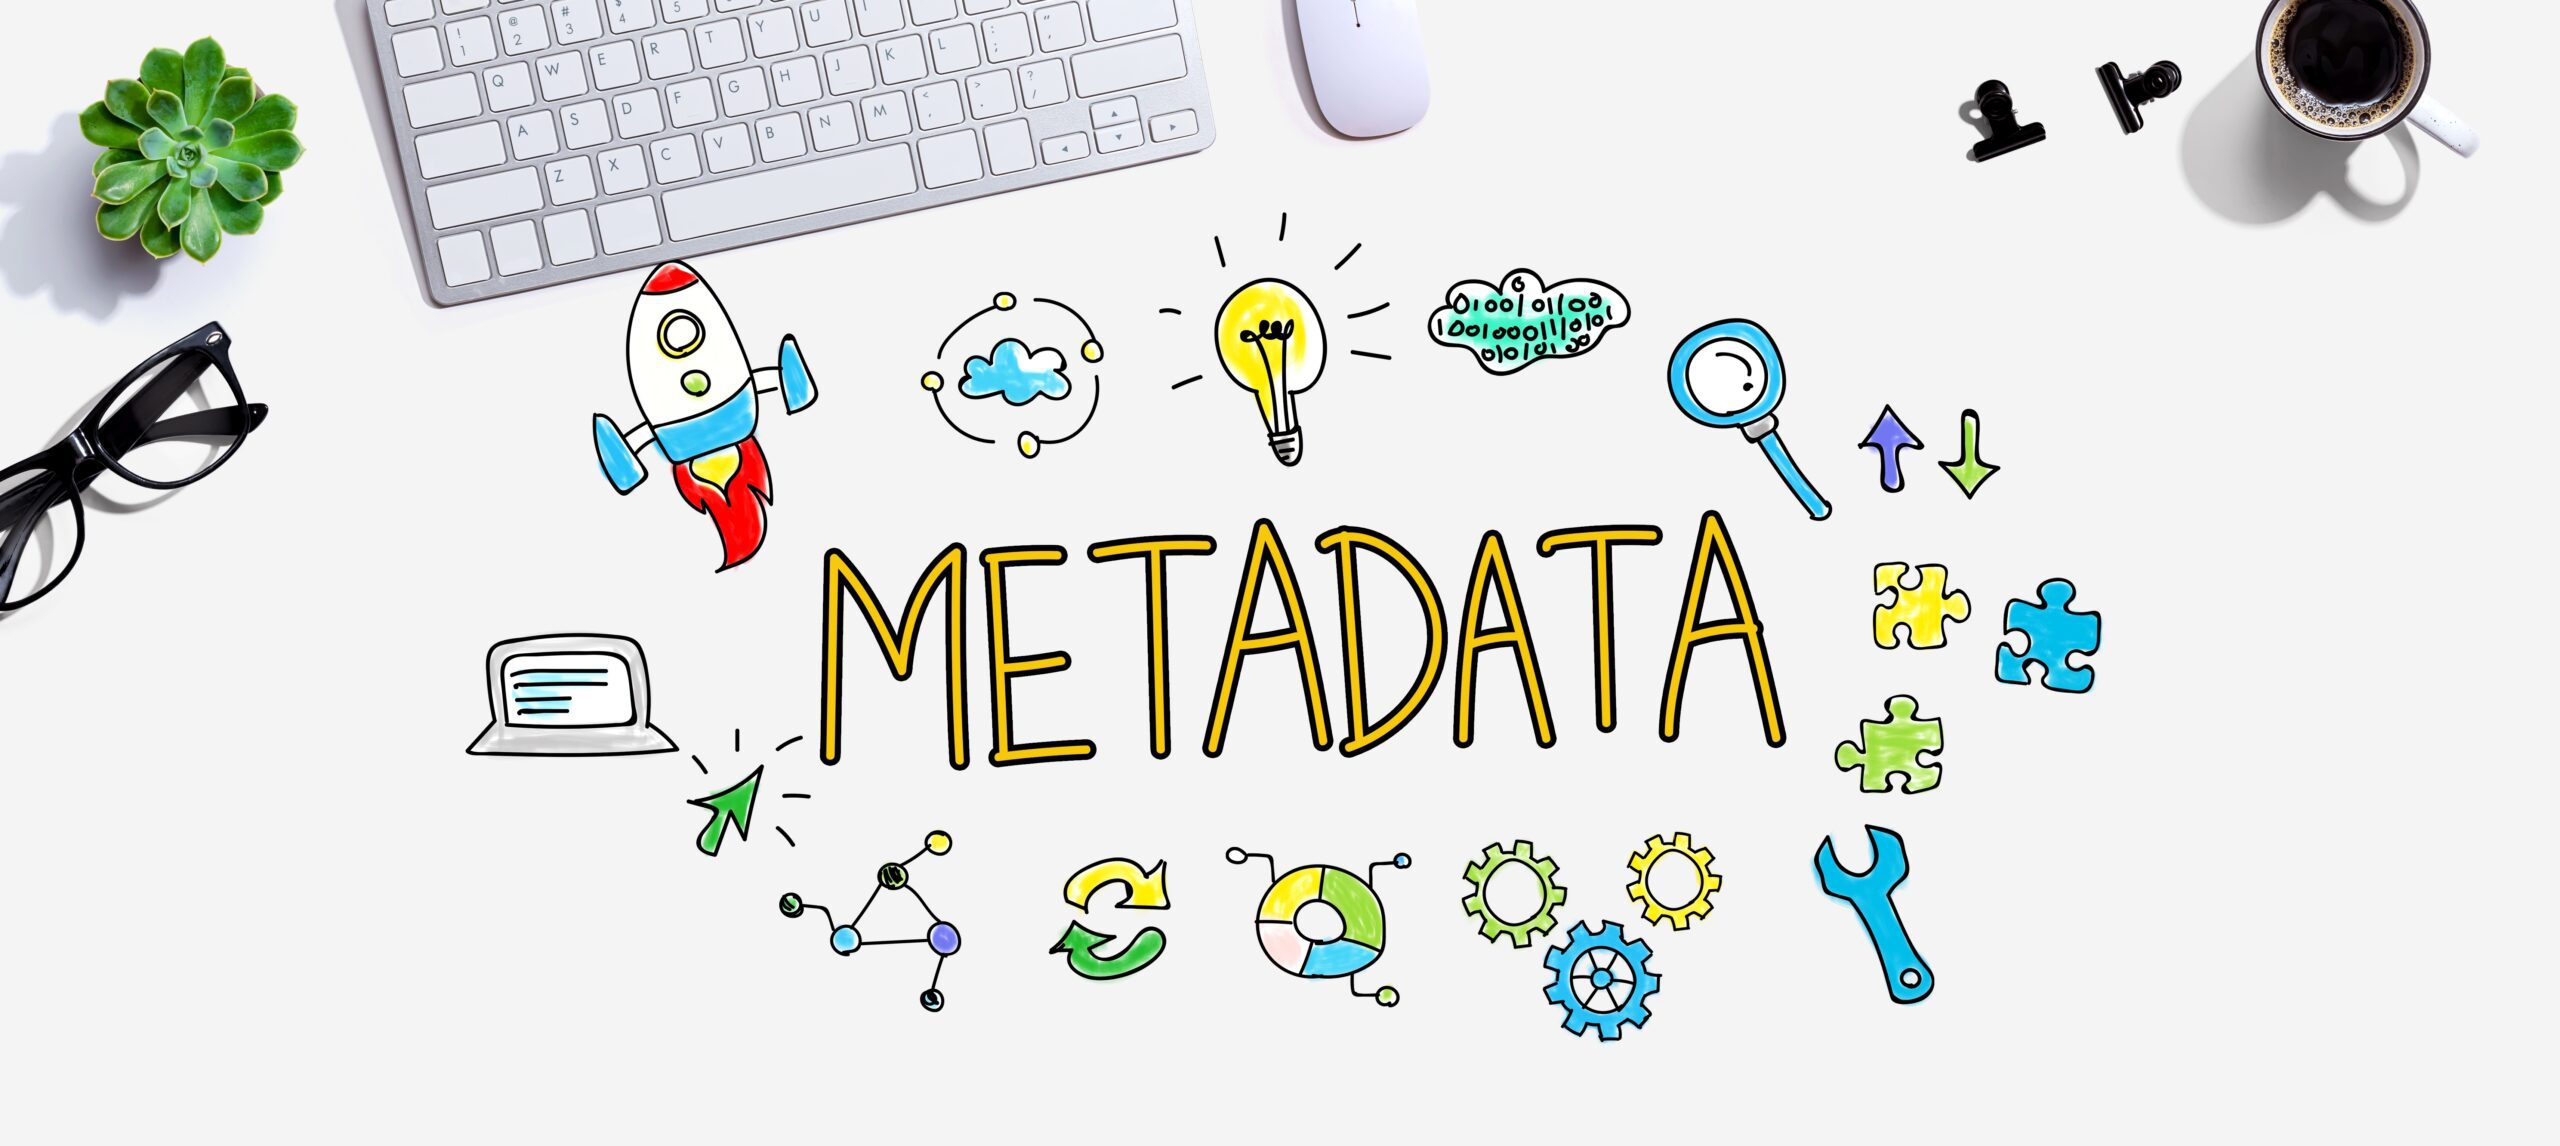 Metadata,With,A,Computer,Keyboard,And,A,Mouse